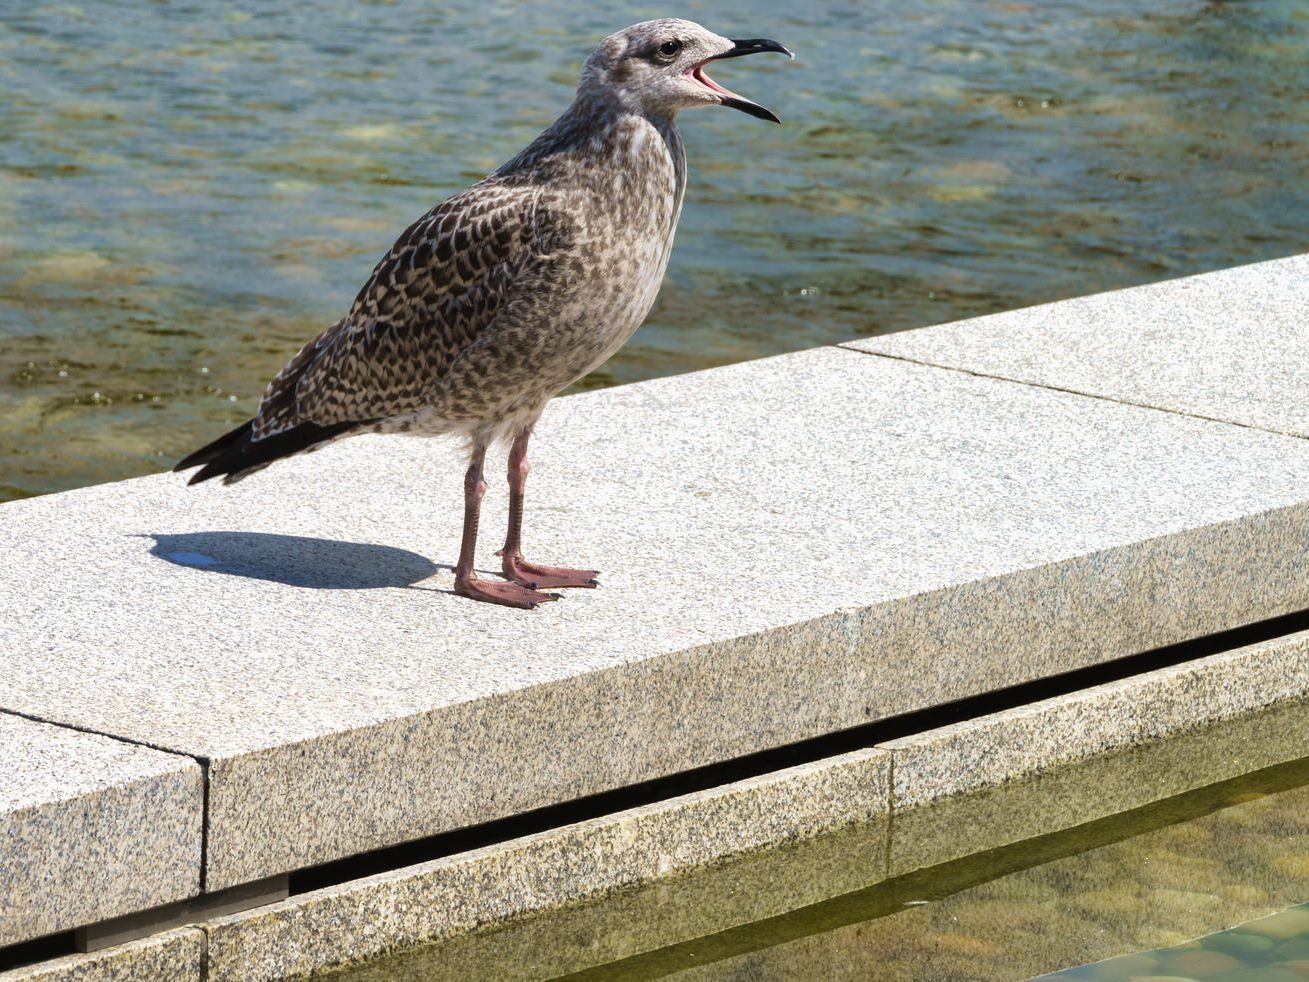 YOUNG SEAGULL WAS UPSET BECAUSE ADULT WOULD NOT FEED IT 004